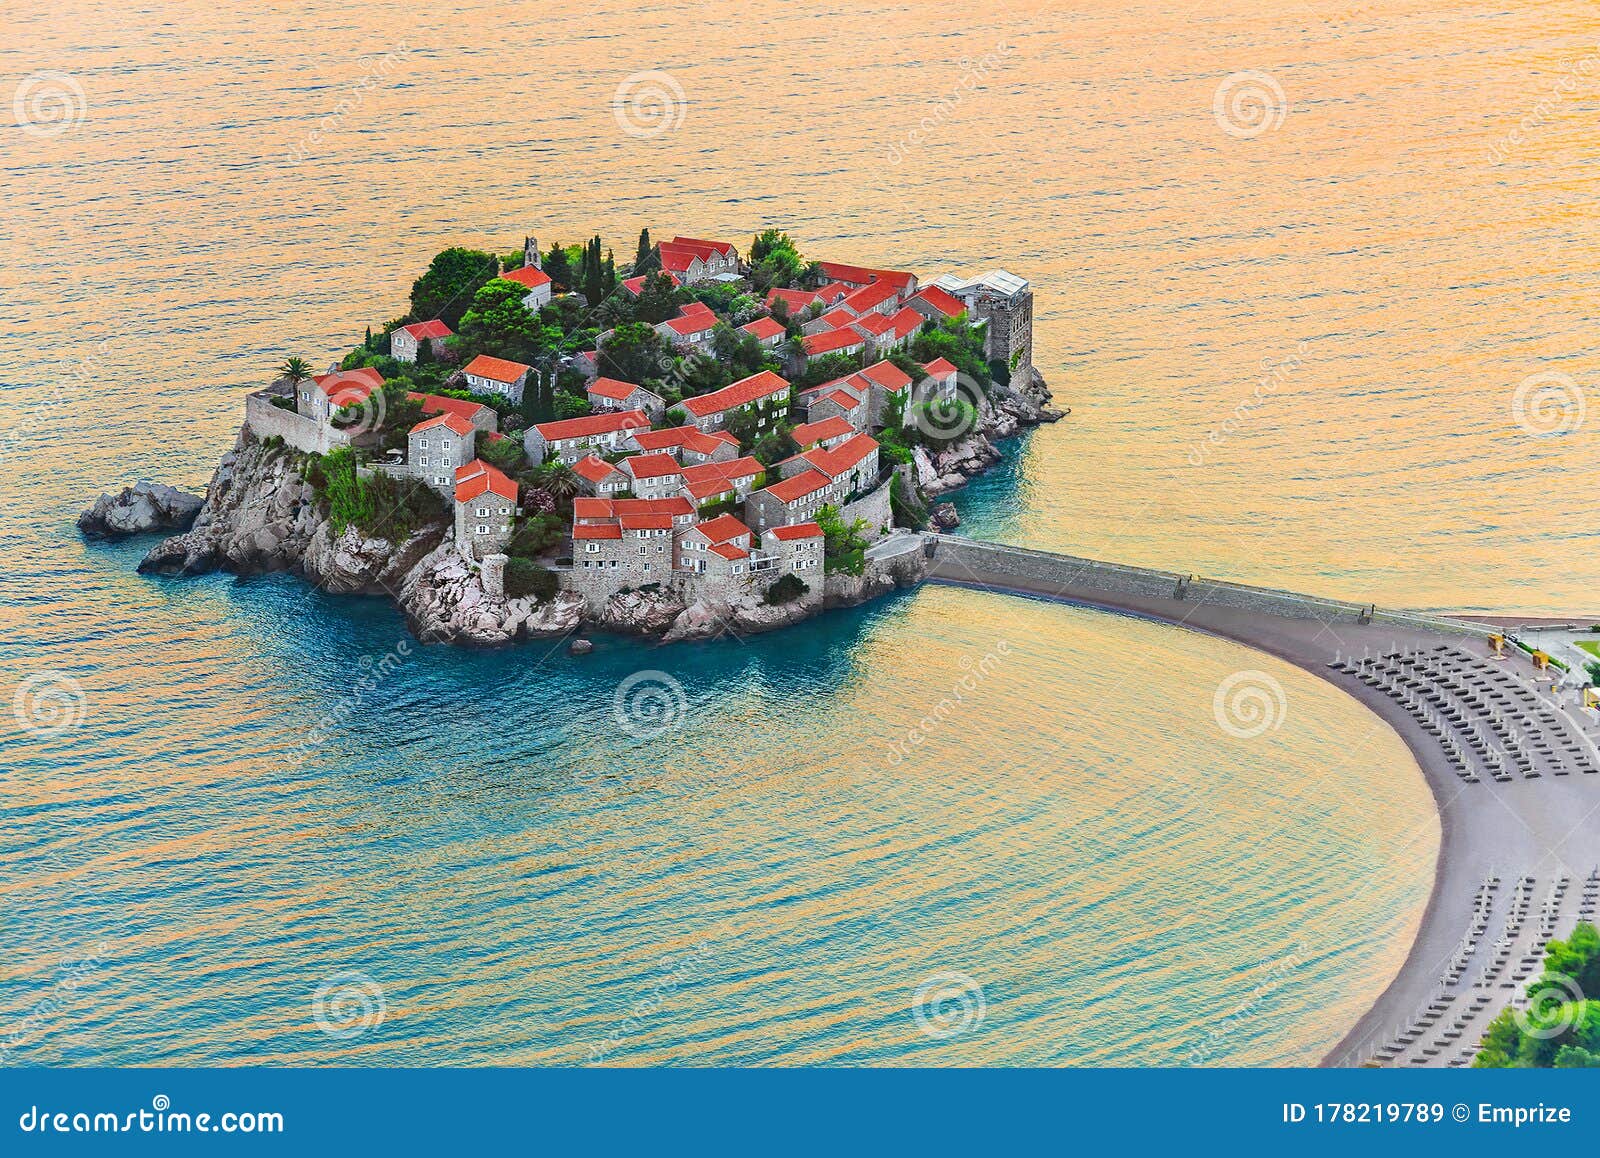 sveti stefan small island with red-tiled roofs, green trees and beautiful sandy beach with sunbeds on the adriatic coast of